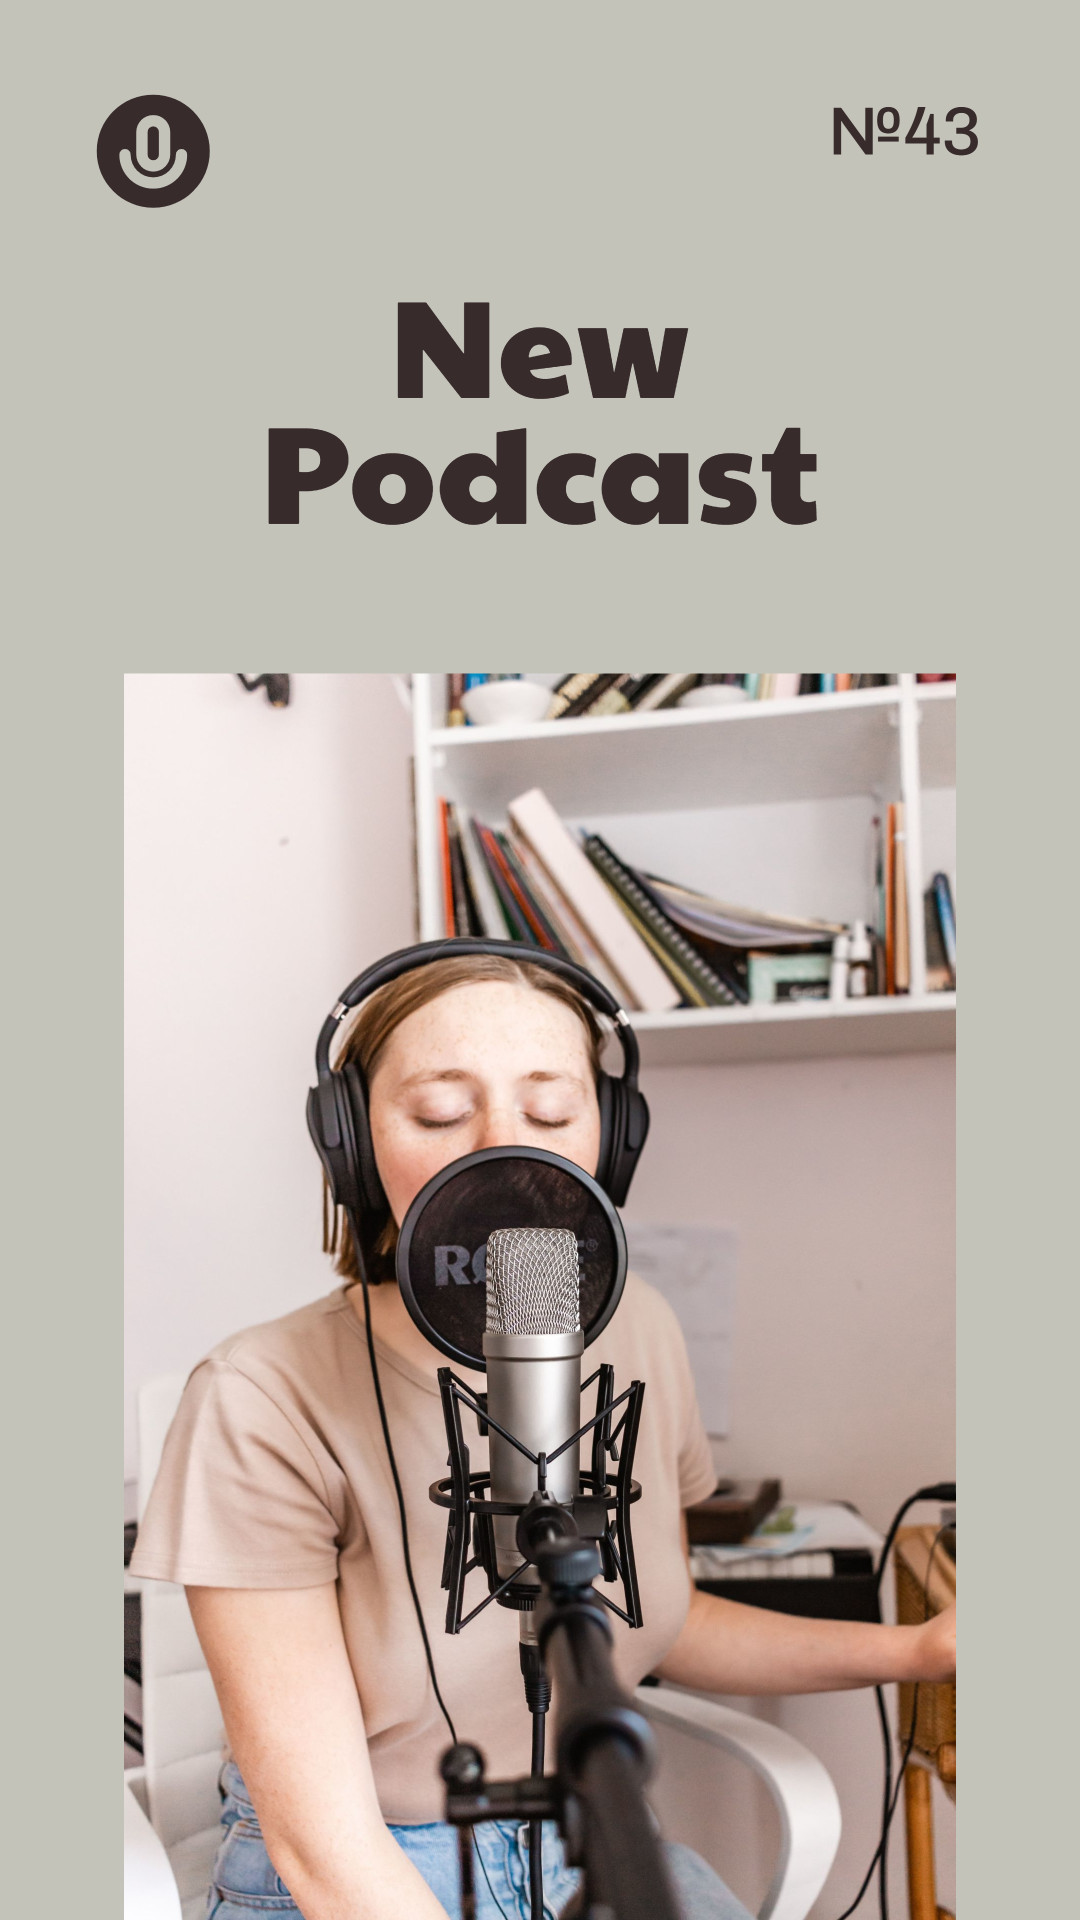 New podcast story template design